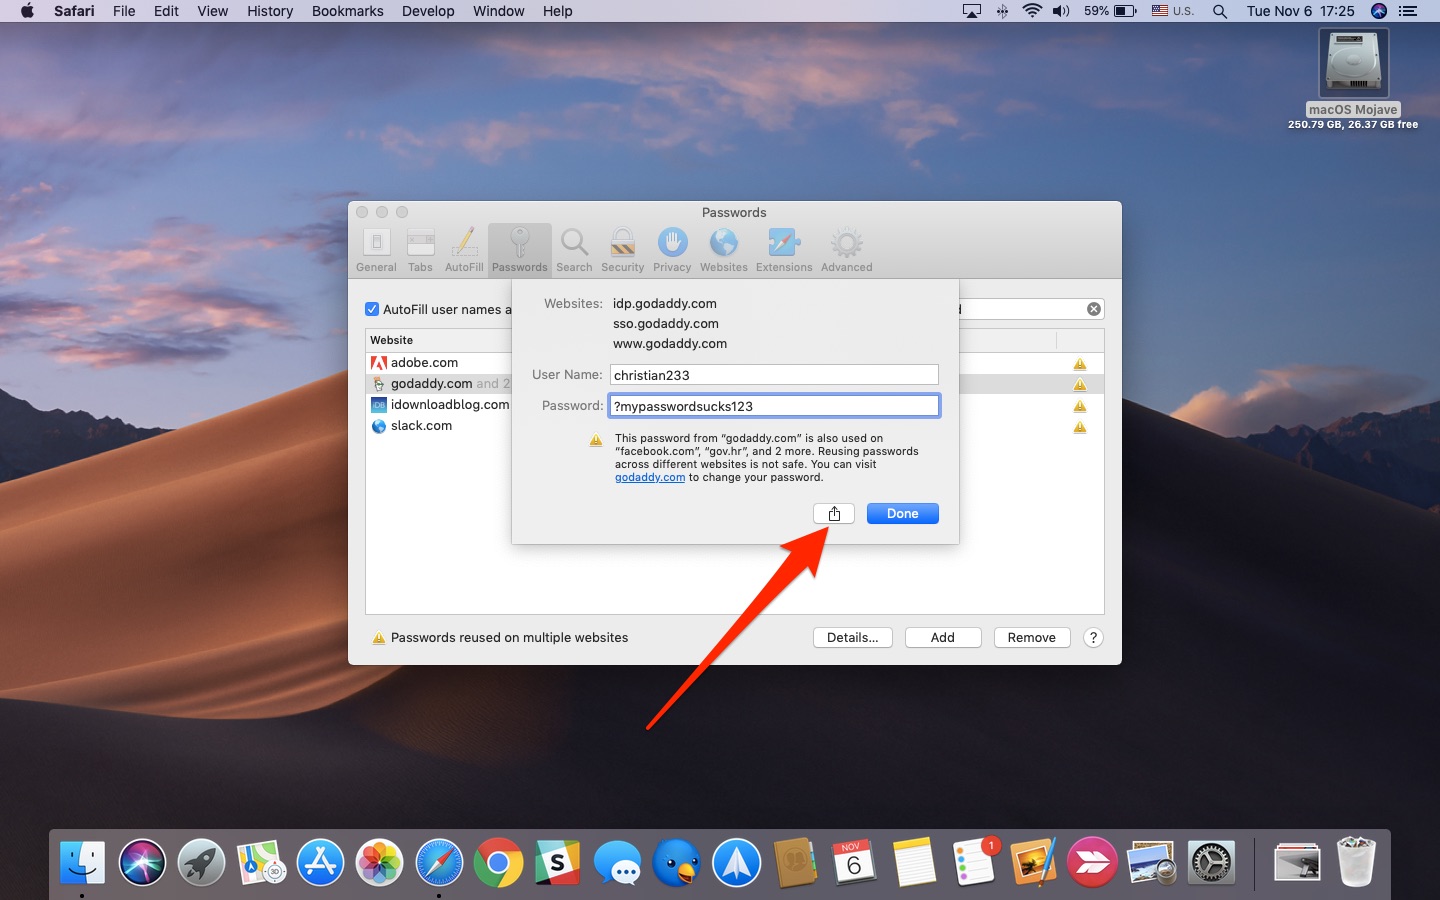 macOS_Mojave_AirDrop_saved_passwords_008